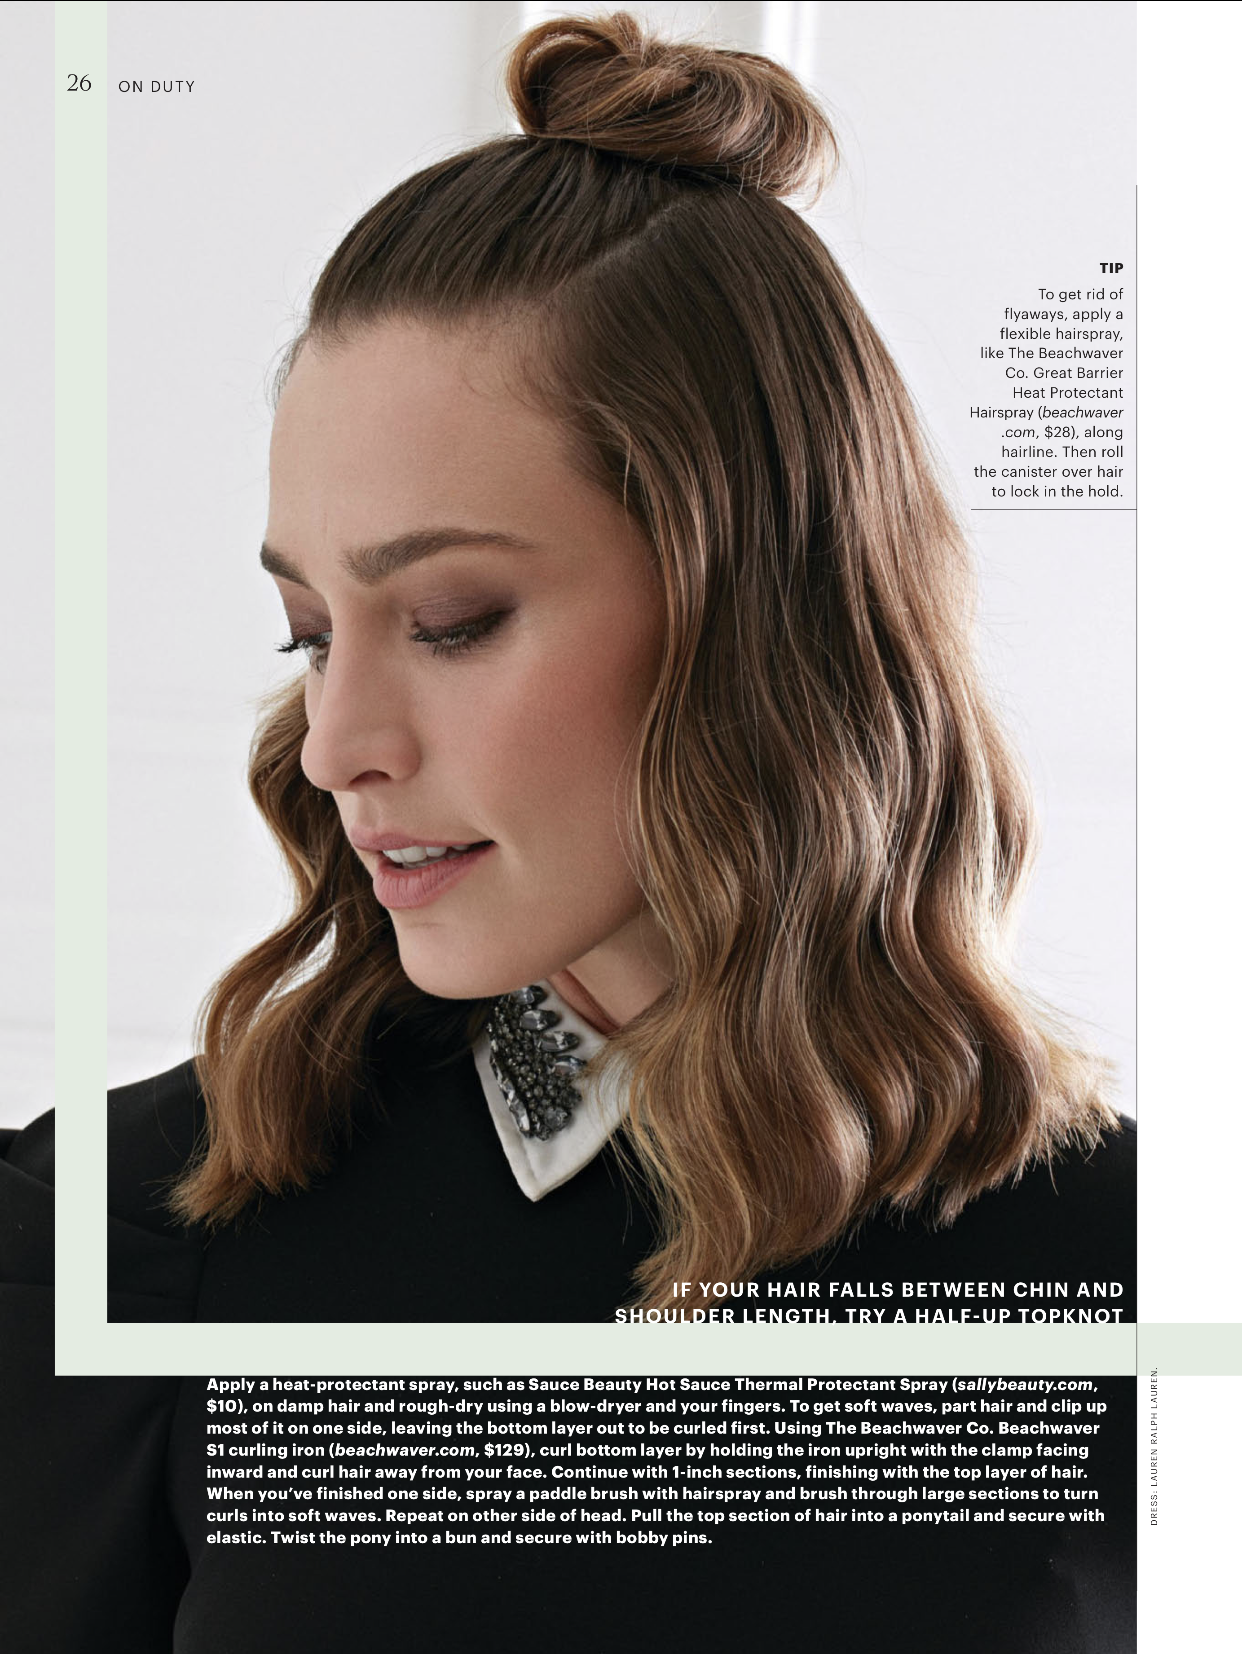 Sauce Beauty featured in a Family Circle magazine on styling hair.